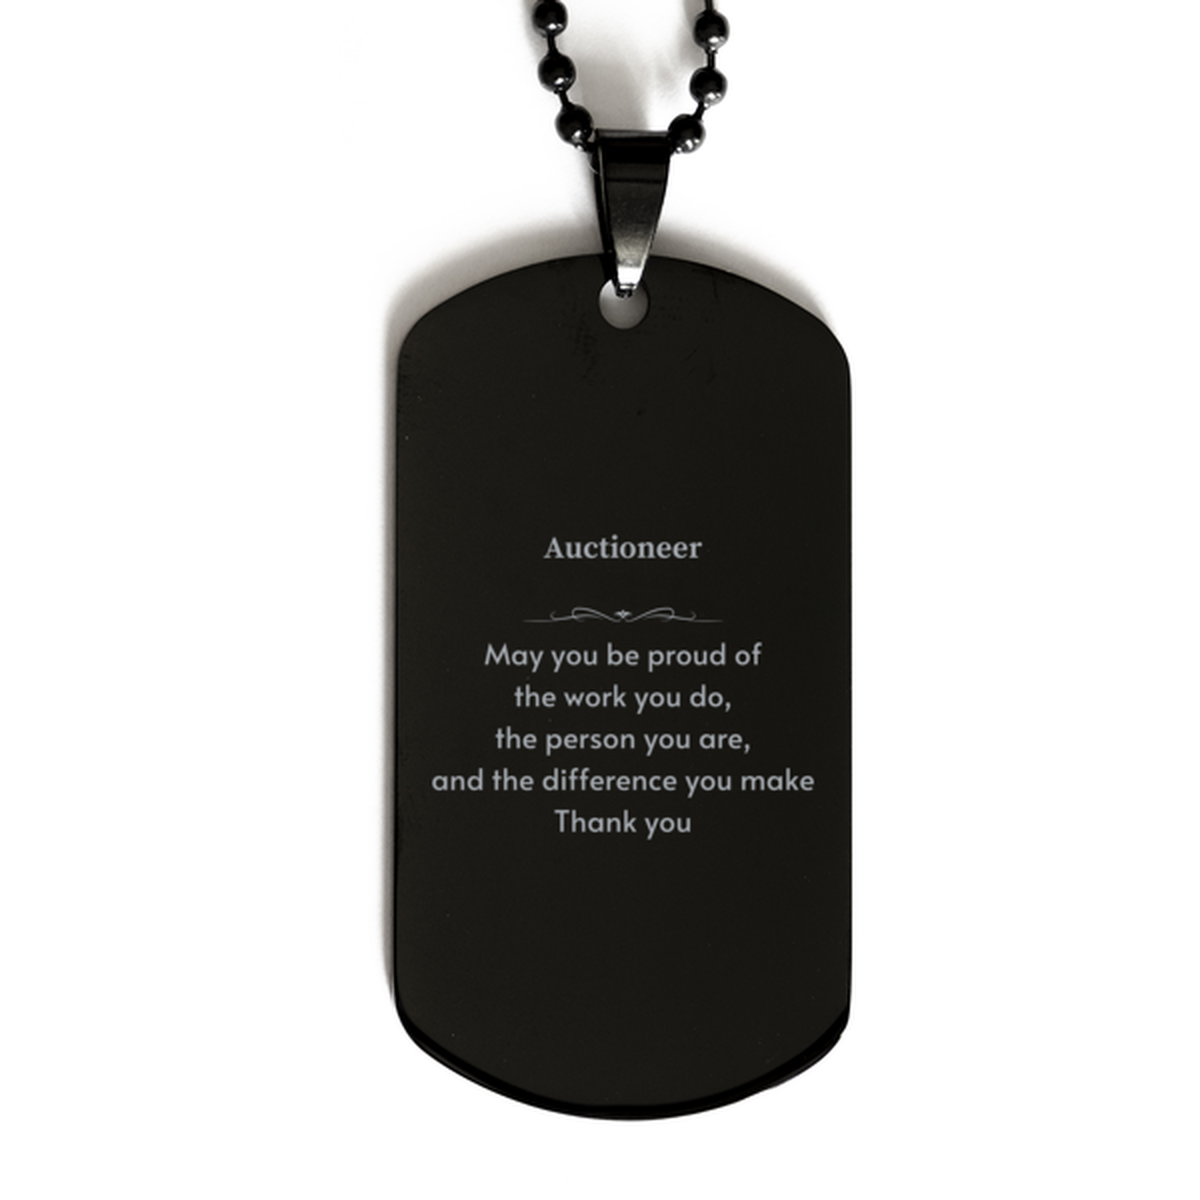 Heartwarming Black Dog Tag Retirement Coworkers Gifts for Auctioneer, Auctioneer May You be proud of the work you do, the person you are Gifts for Boss Men Women Friends